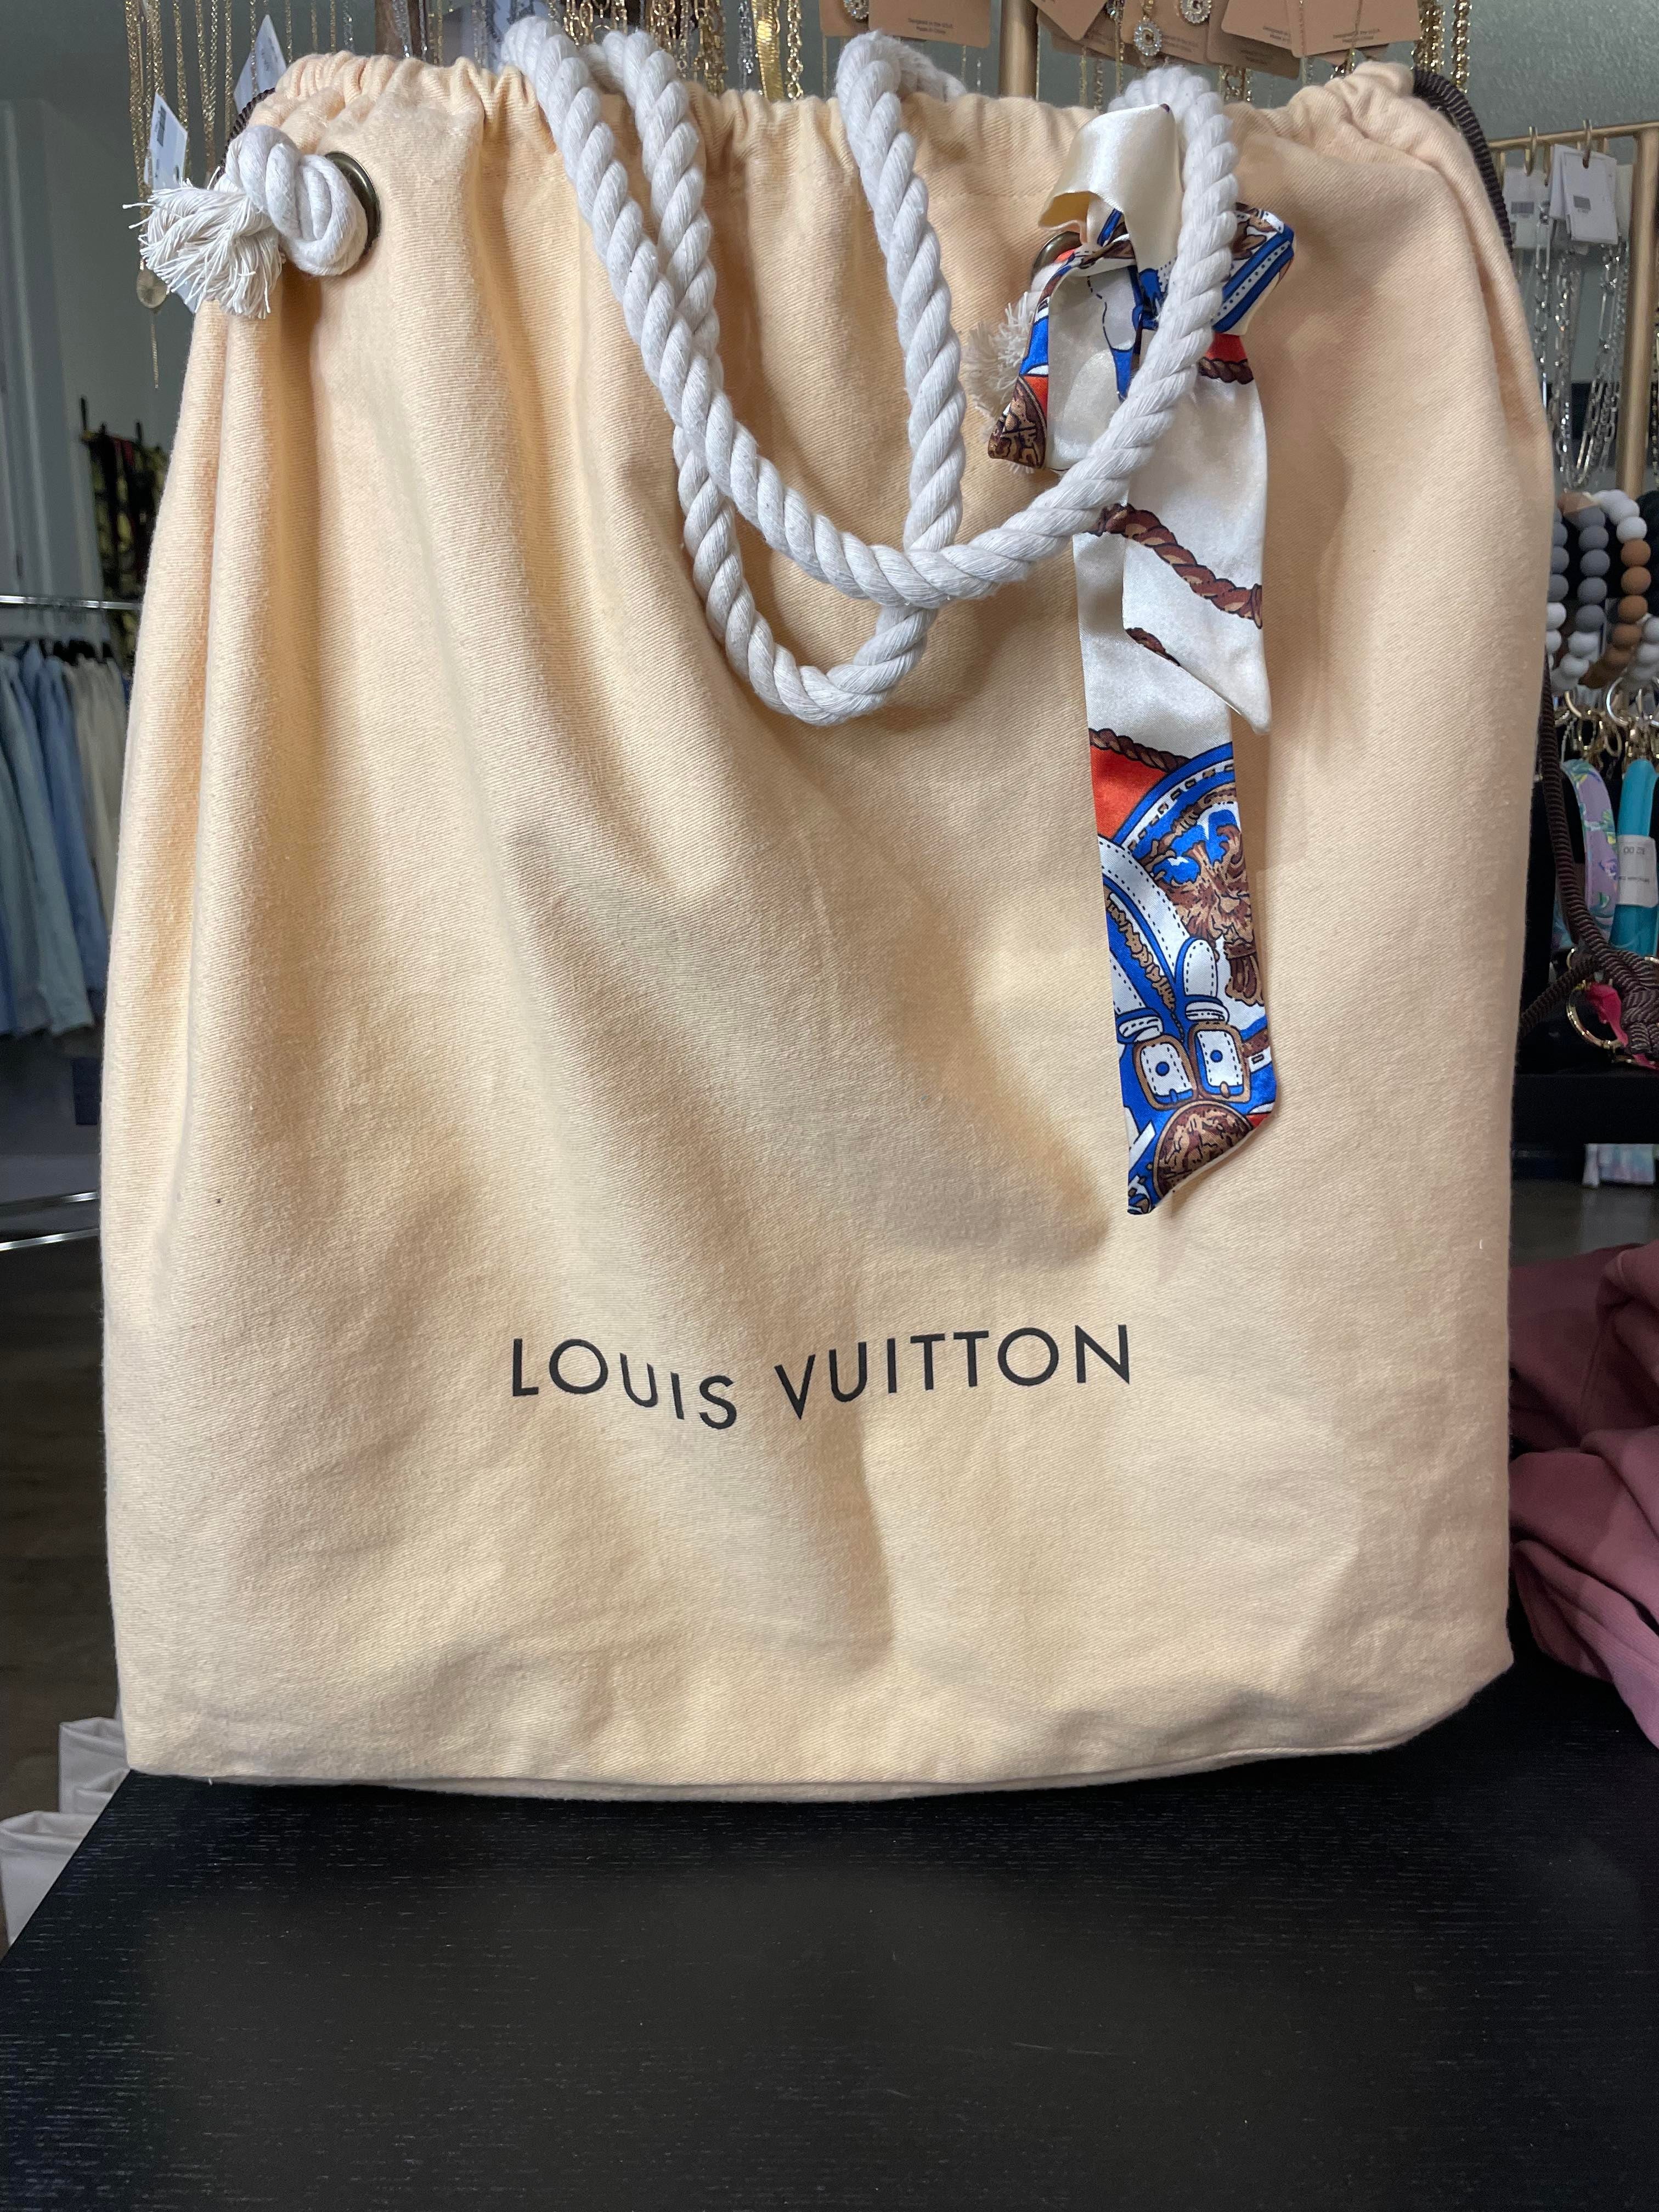 Louis Vuitton® Focus on LV Brand In Chrome – Fixtures Close Up